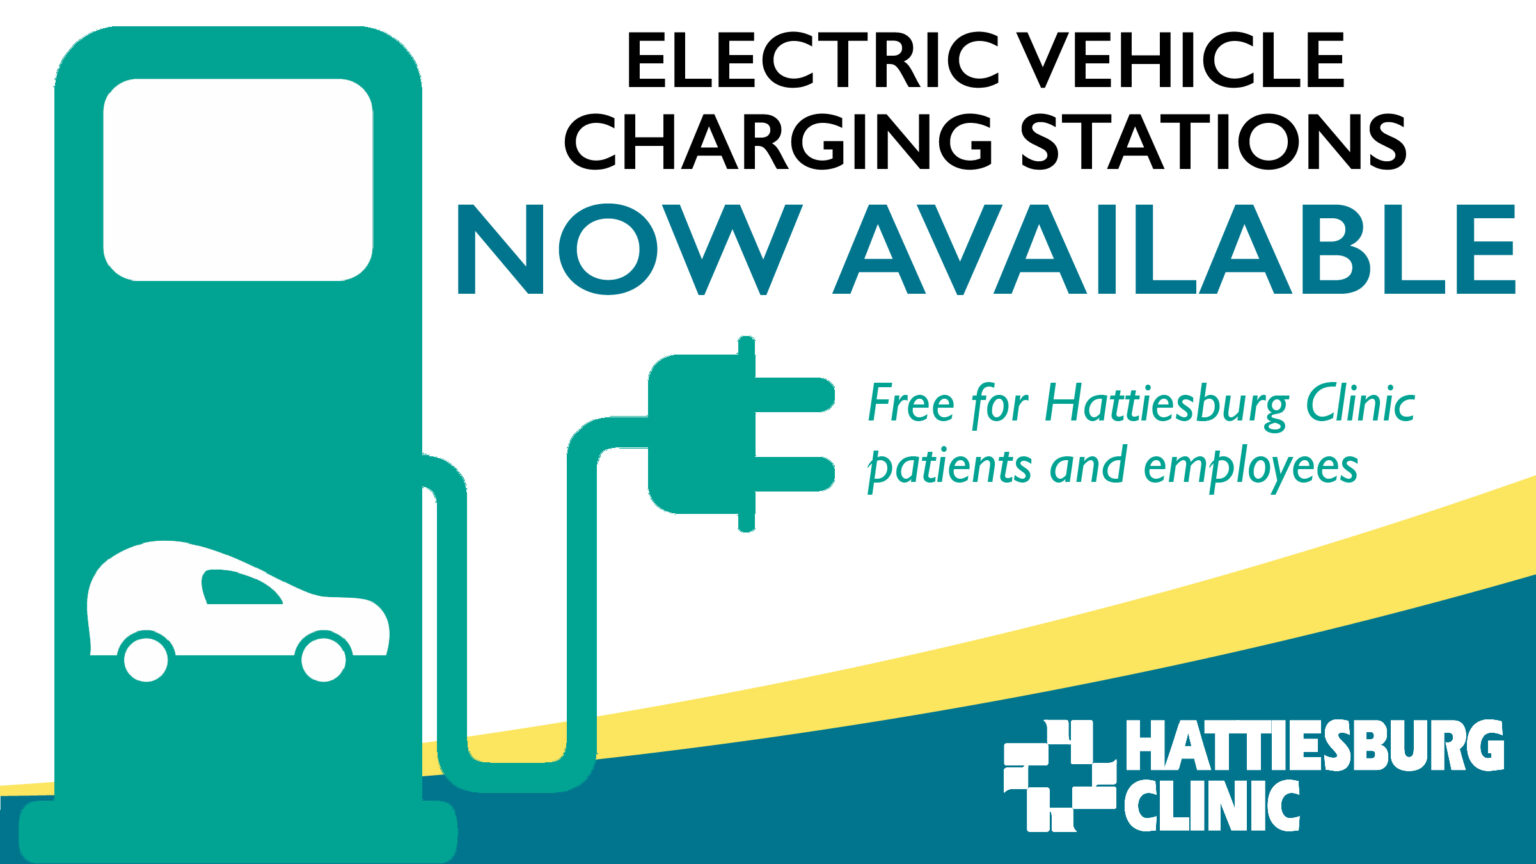 EV Charging Stations Now Available